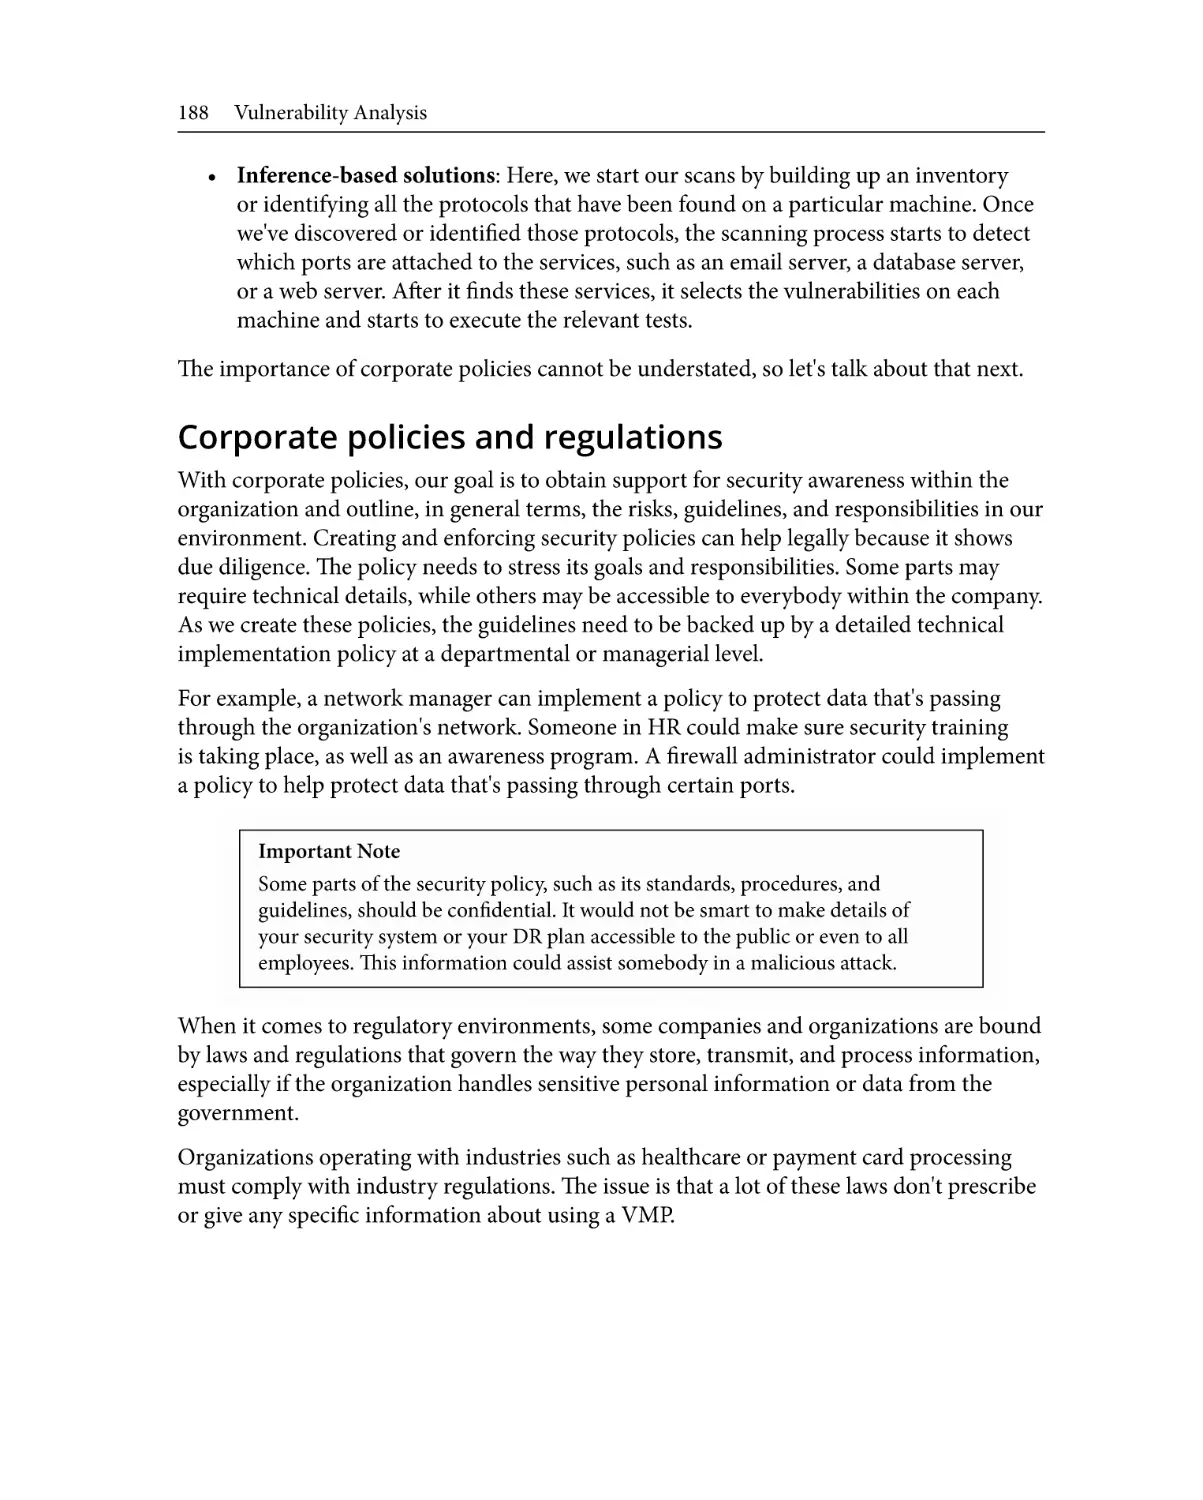 Corporate policies and regulations